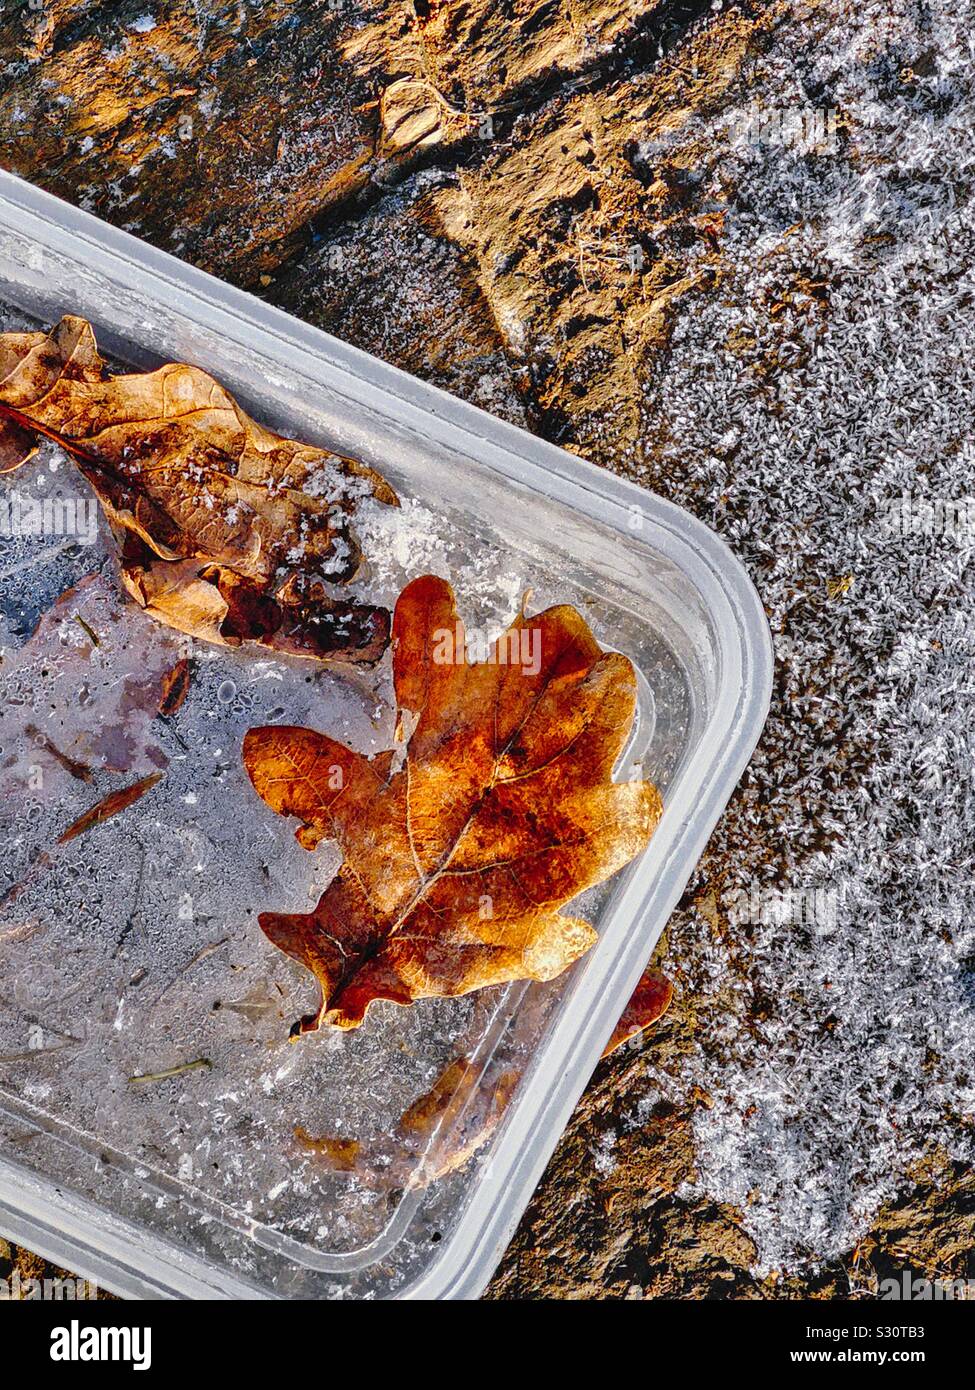 Autumn leaves frozen in dumped abandoned plastic box as seasons change from autumn to winter, Sweden Stock Photo